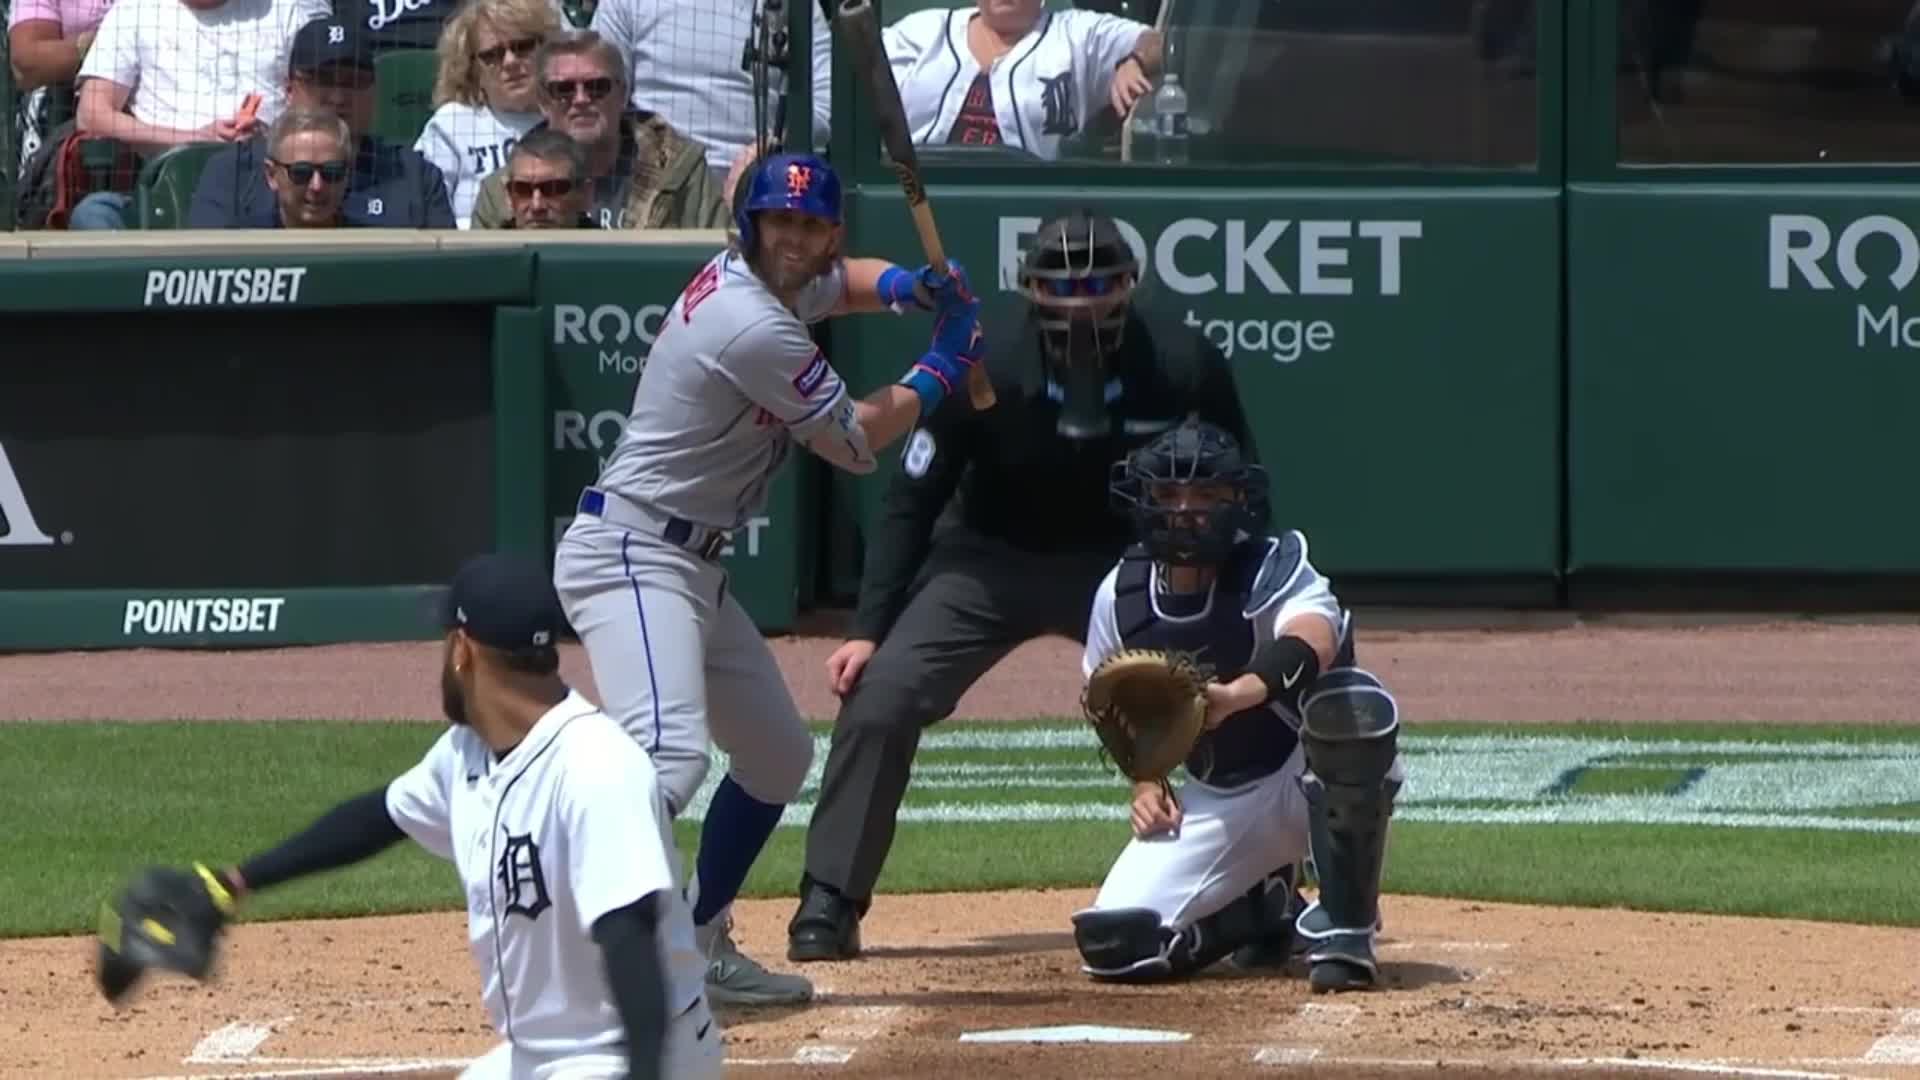 Highlight] Jeff McNeil gets rung up and goes off on the ump. : r/baseball